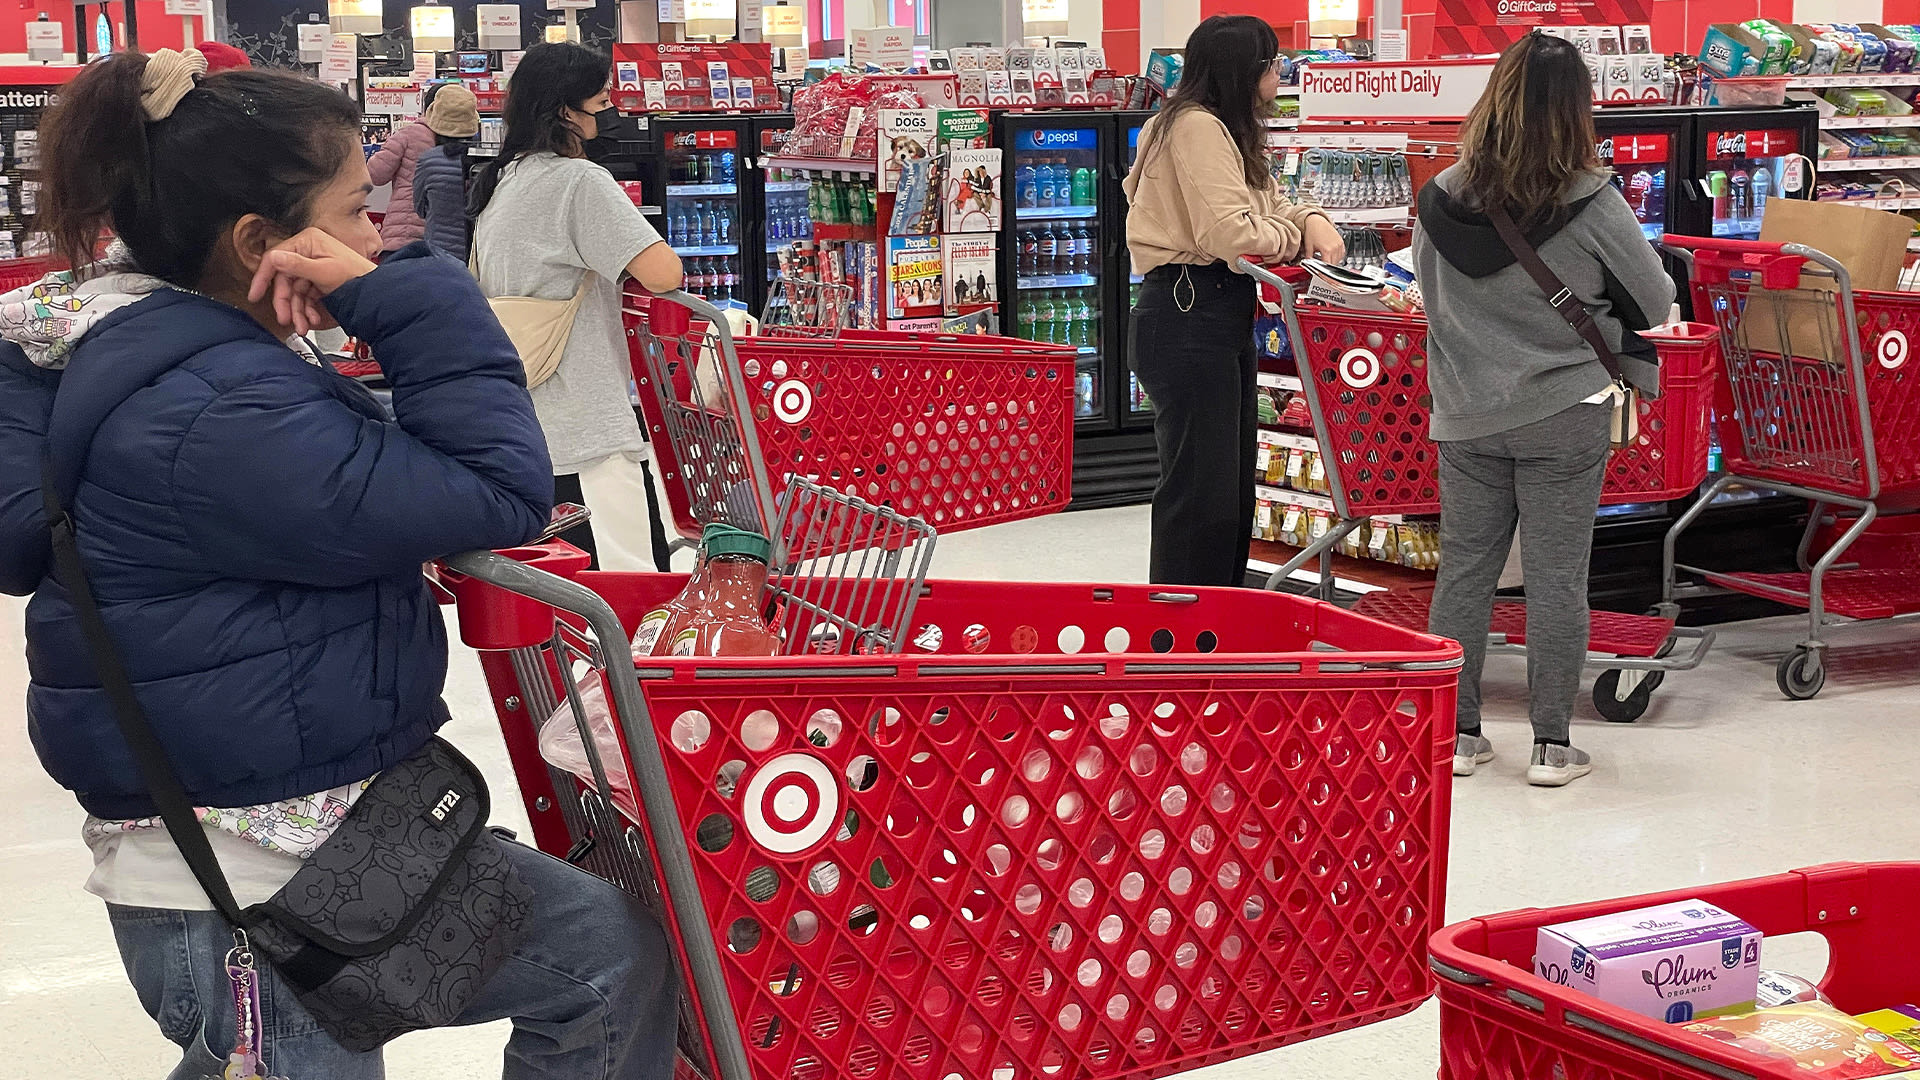 'Feeling like 1600 BC,' says Target shoppers as self-checkout is closed